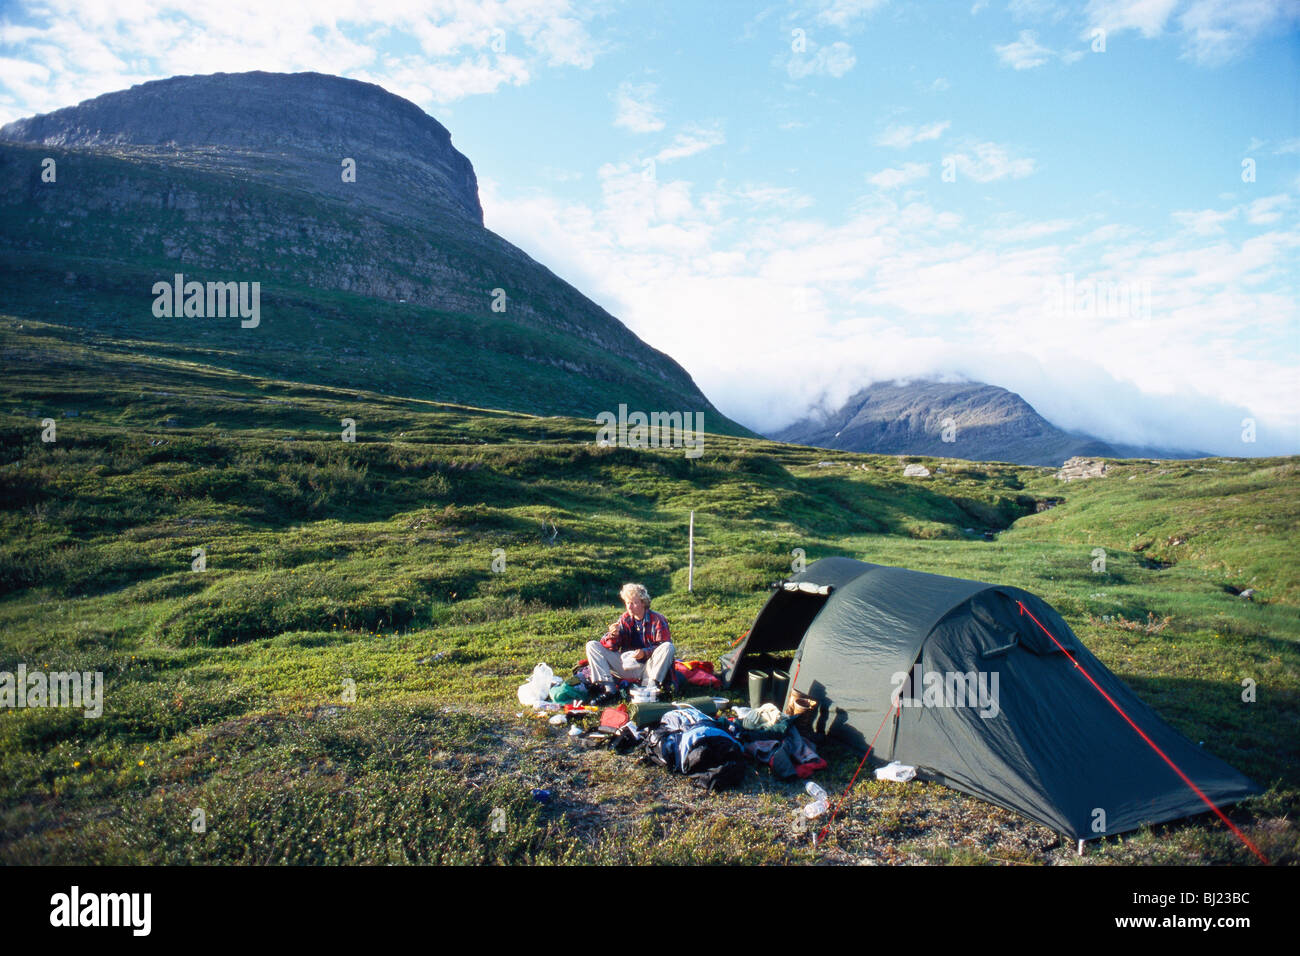 Tent in a mountain scenery, Sweden. Stock Photo